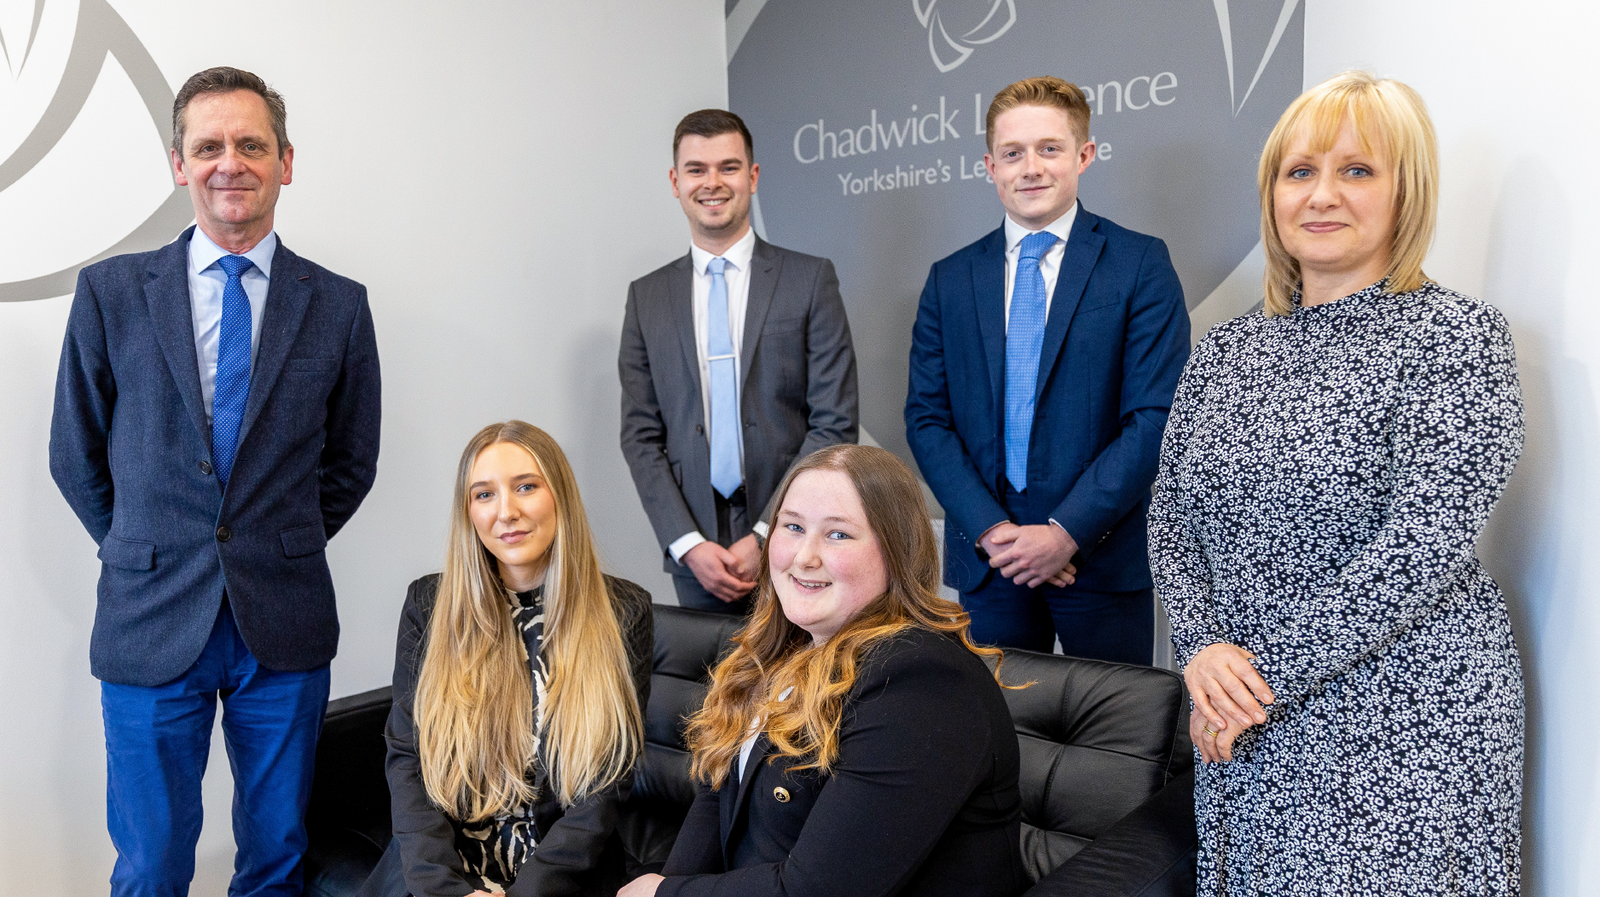 Chadwick Lawrence appoints four new trainee solicitors